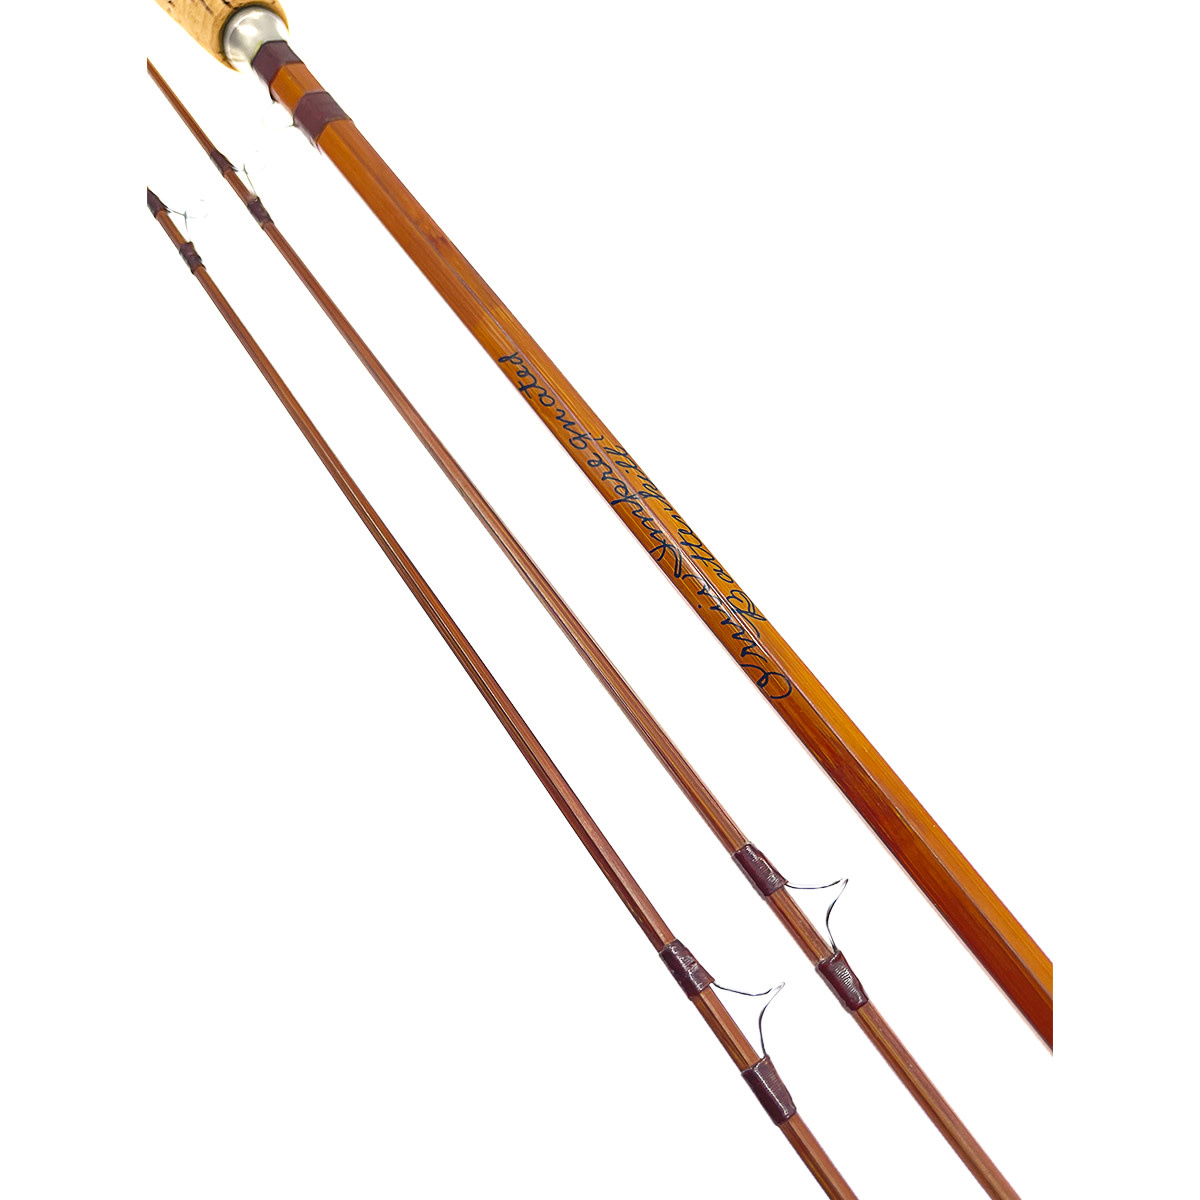 Northwest Classic Tackle - Bamboo Fly Rods, Antique Fly Tying Equipment